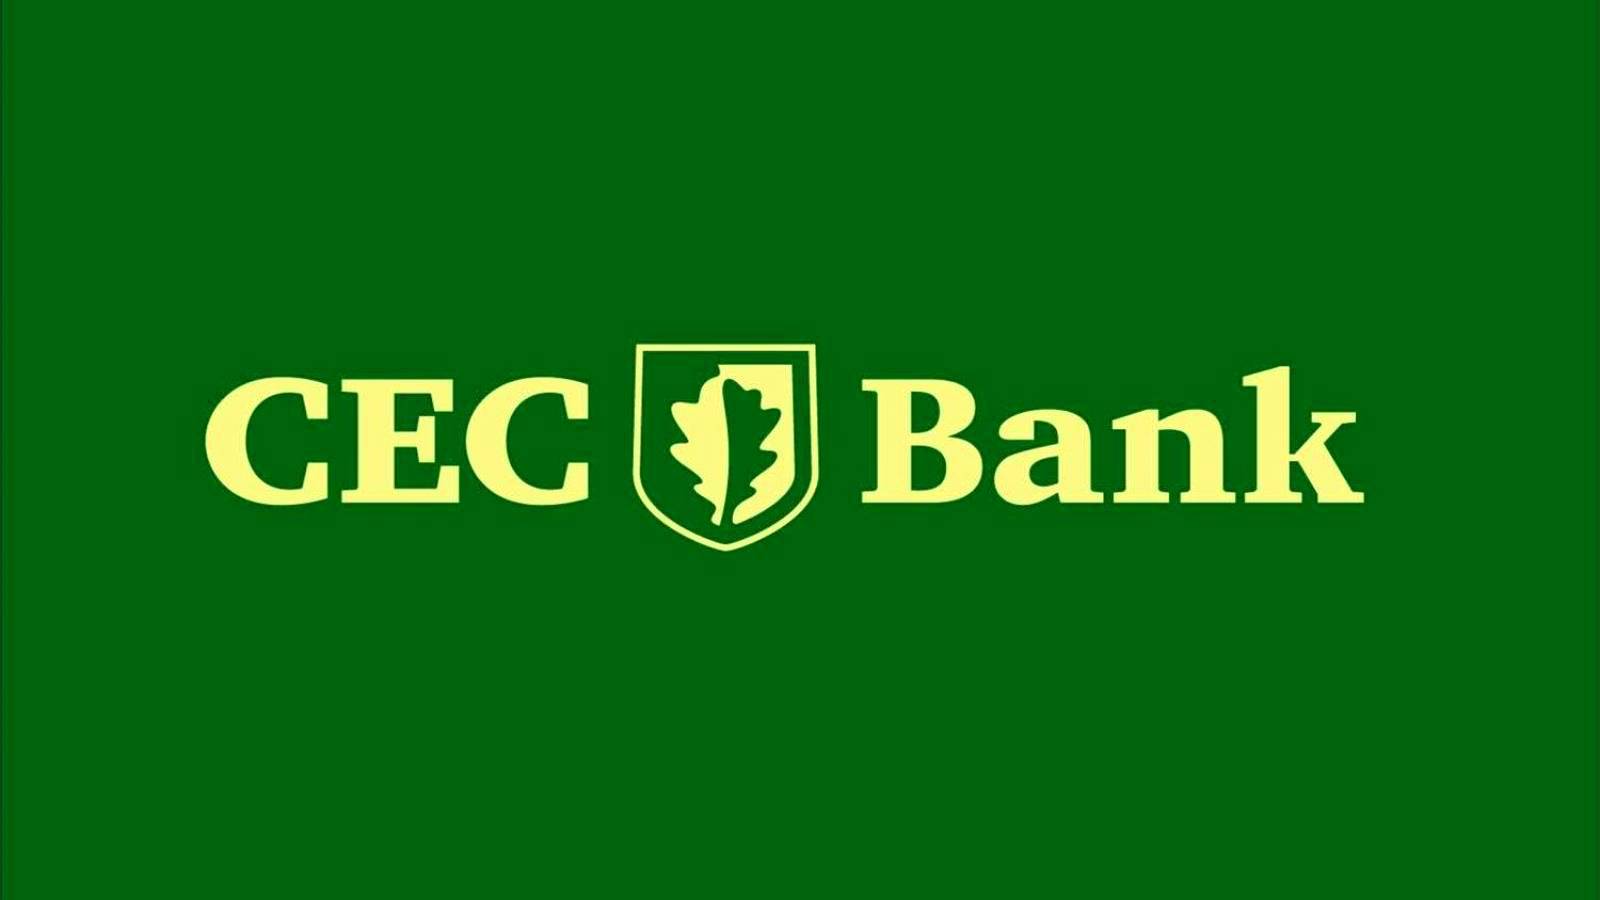 Notification of CEC Bank Major Measure Officially Confirmed to All Customers